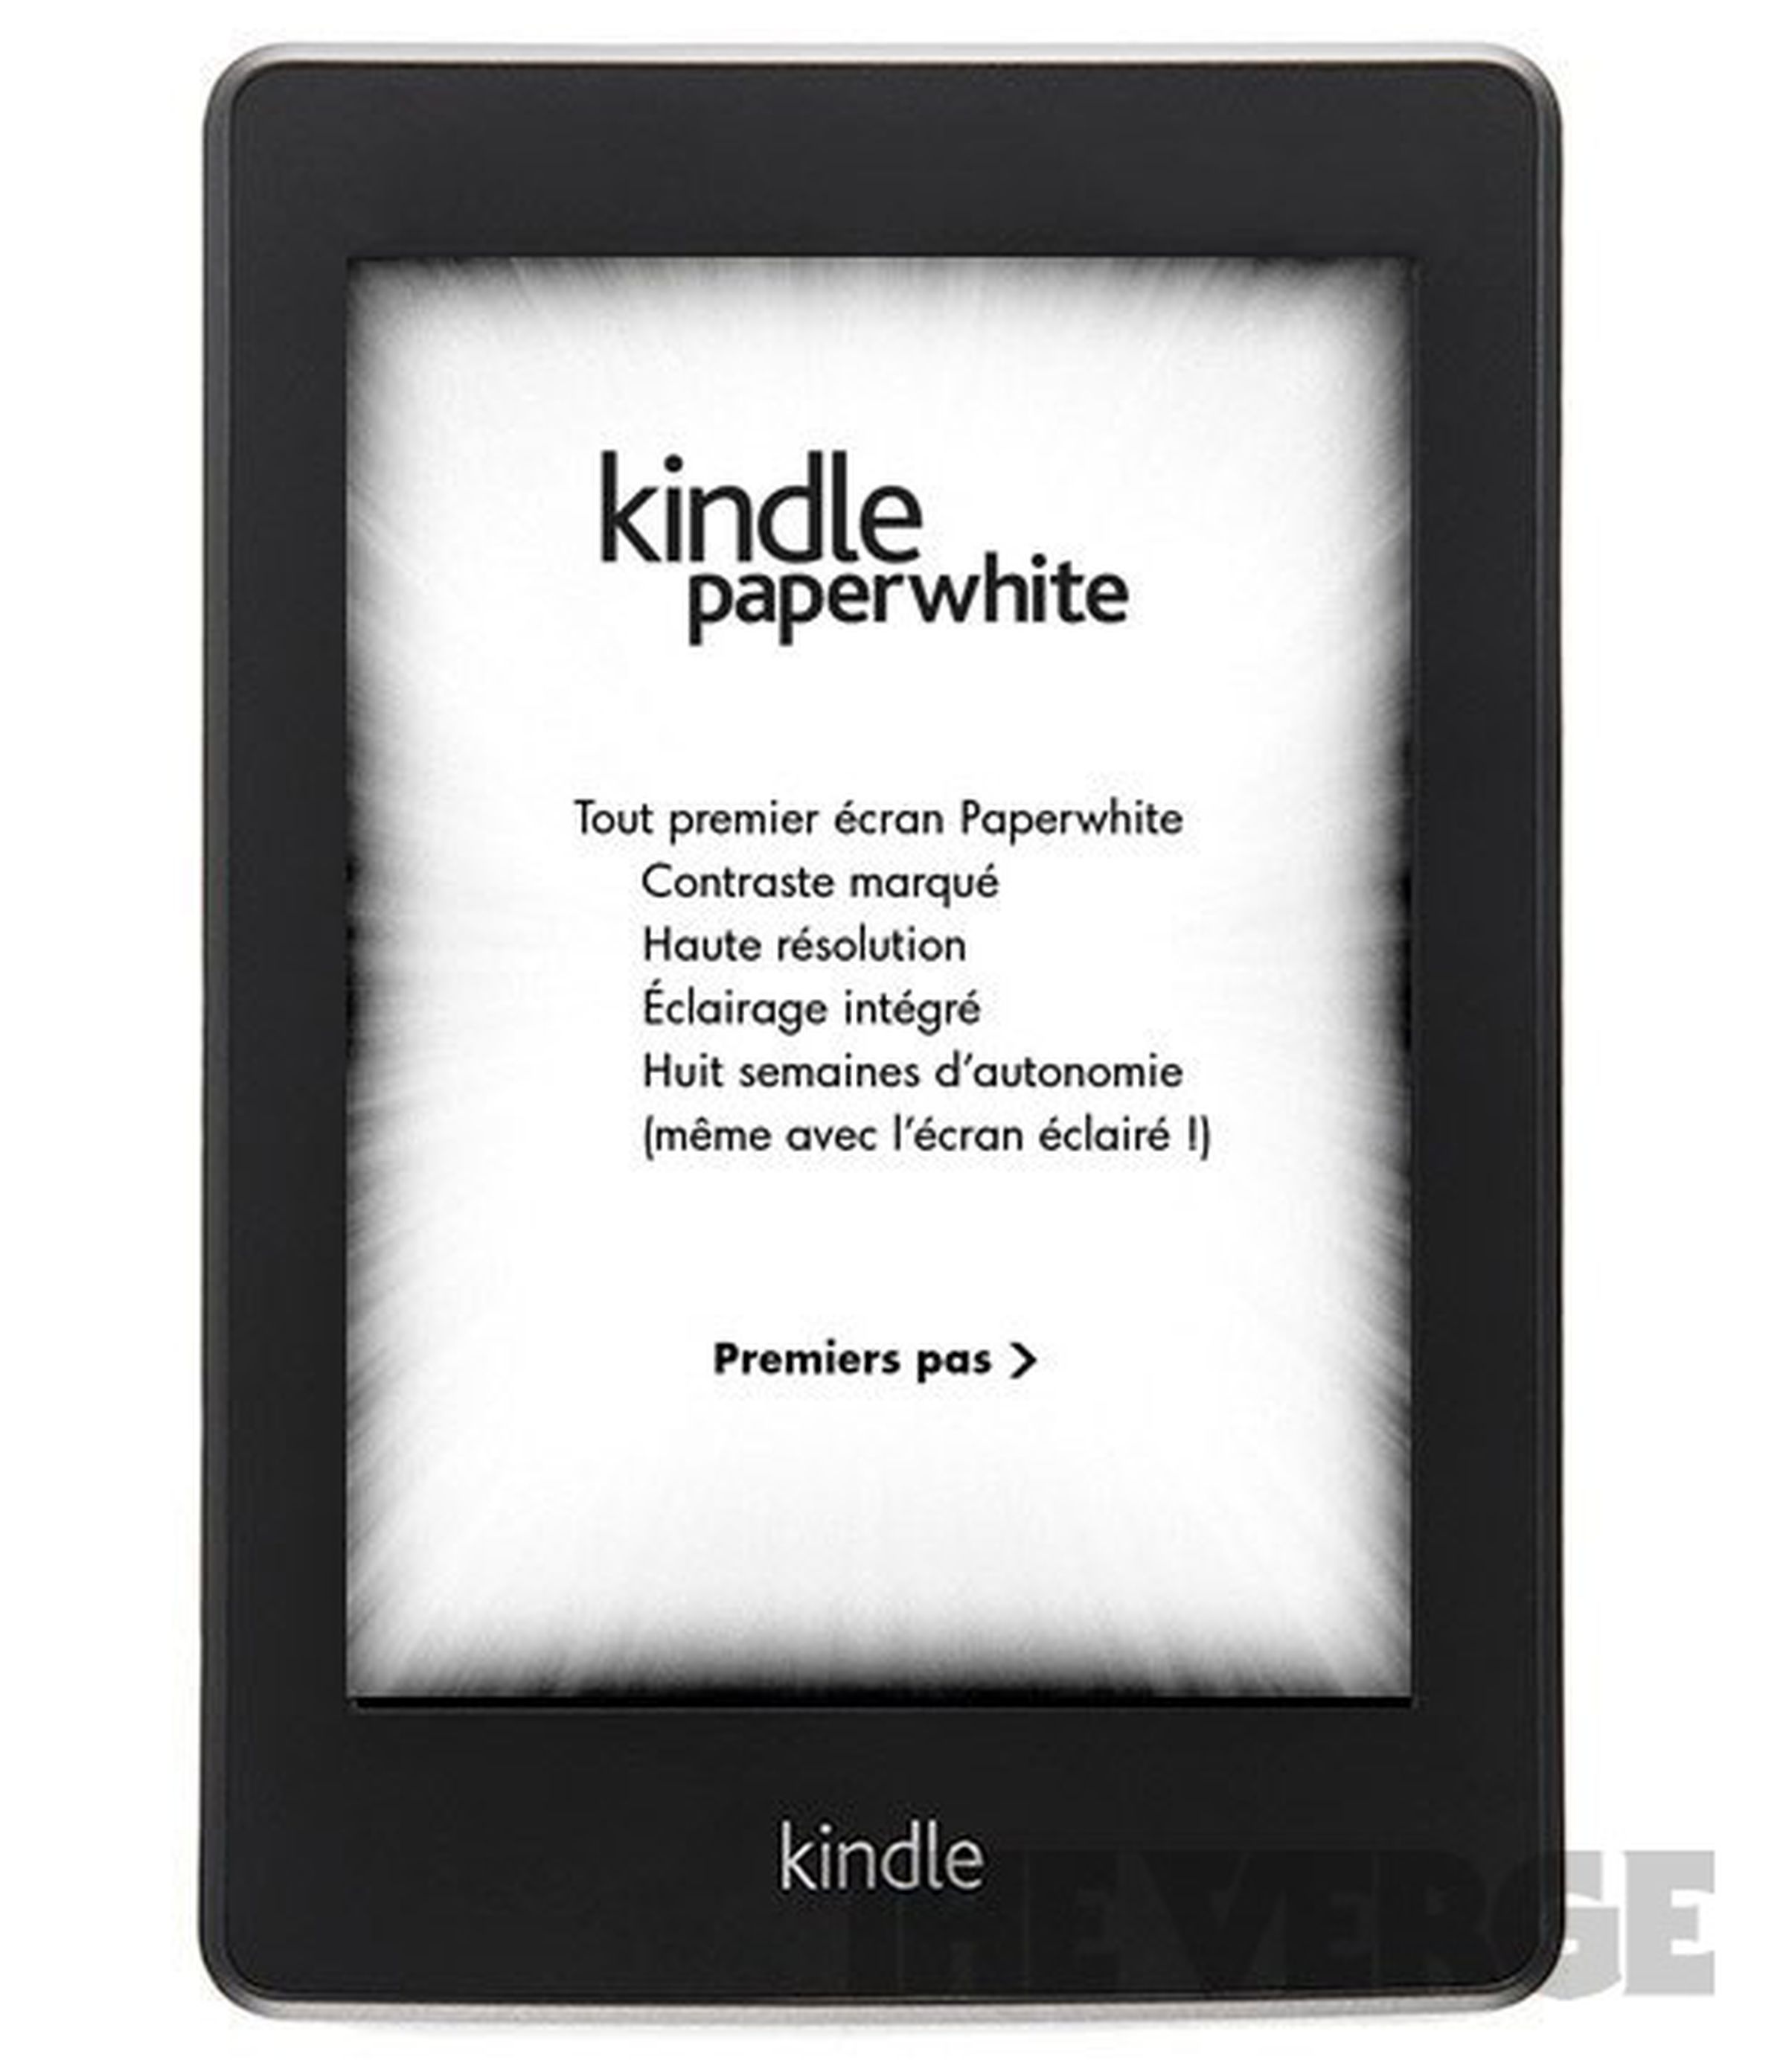 New Kindle with 'Paperwhite' screen images